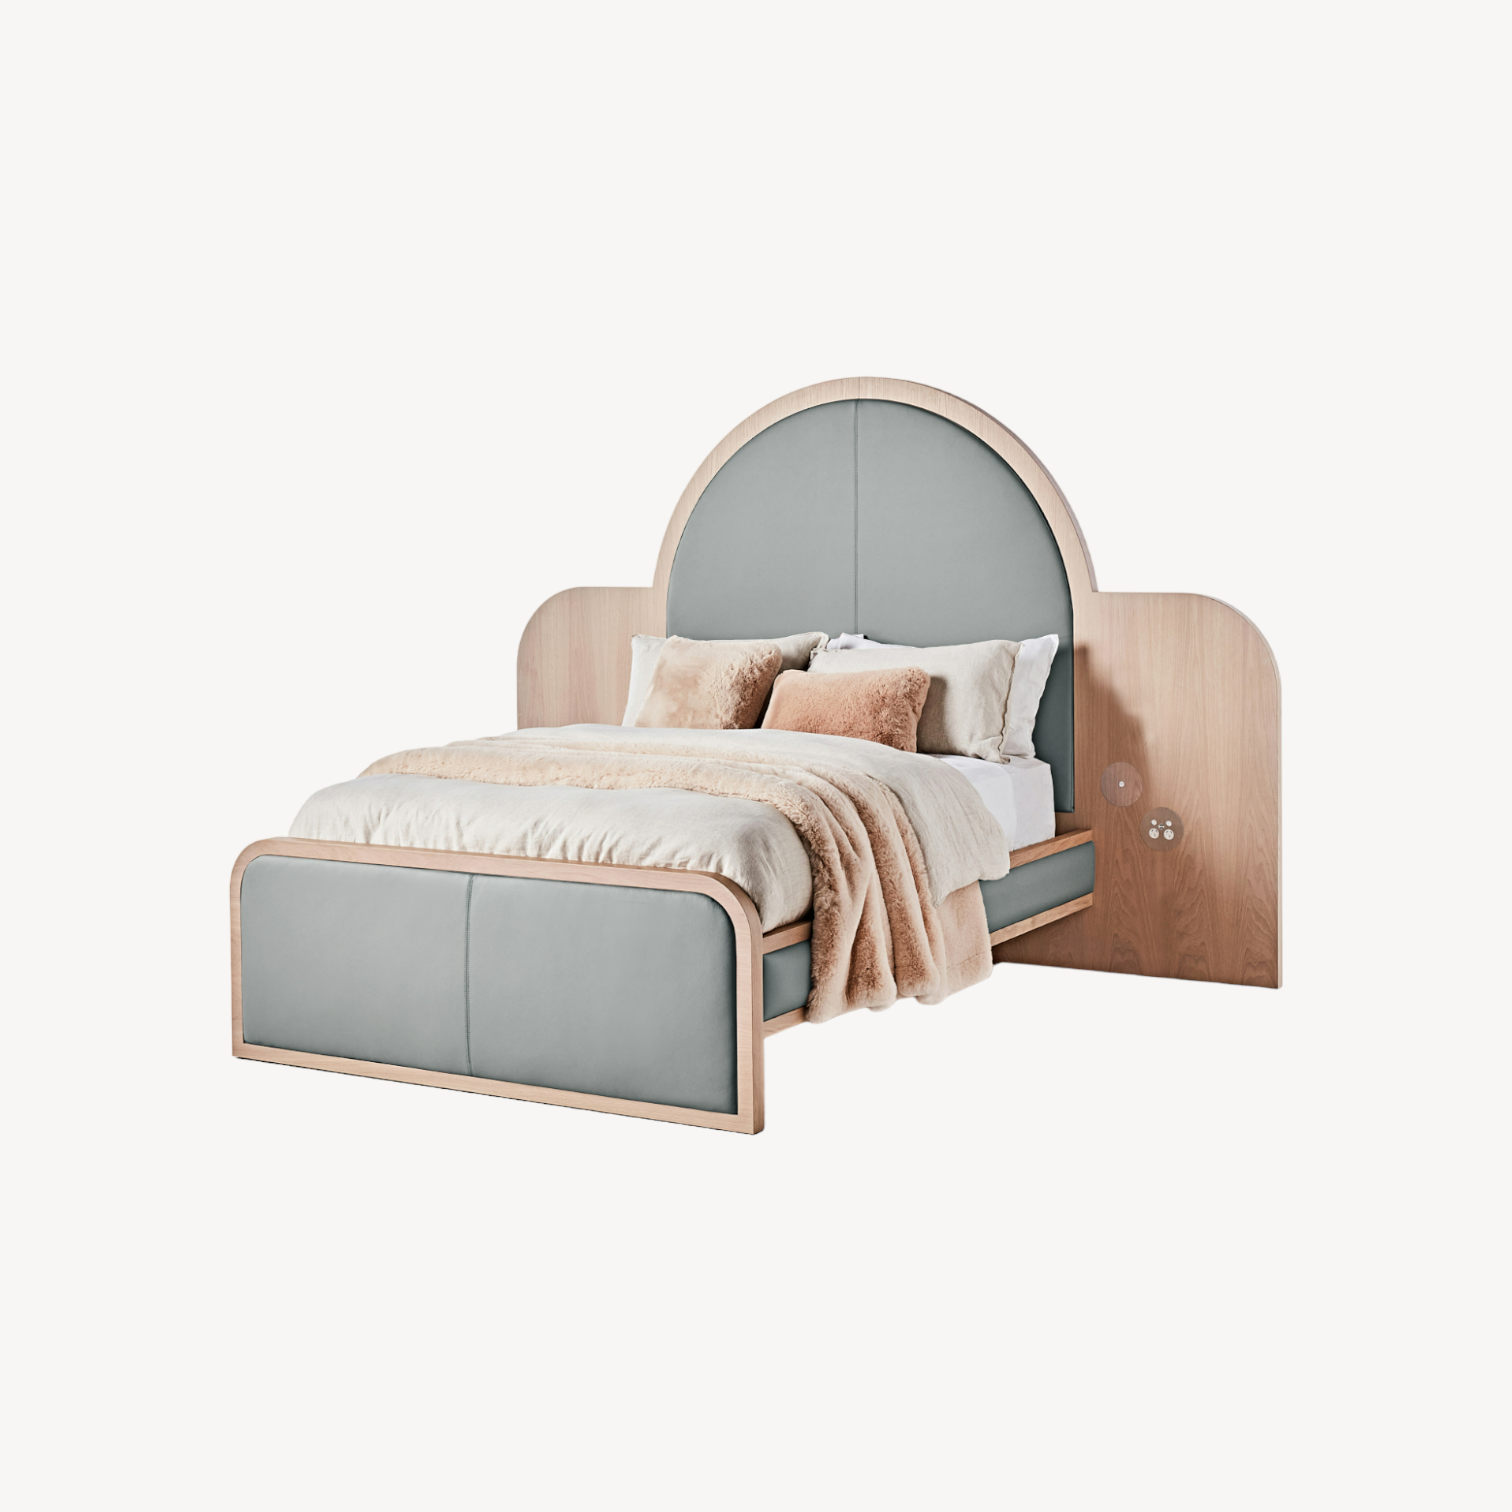 Victoria Grand Extended Bed - Zuster Furniture